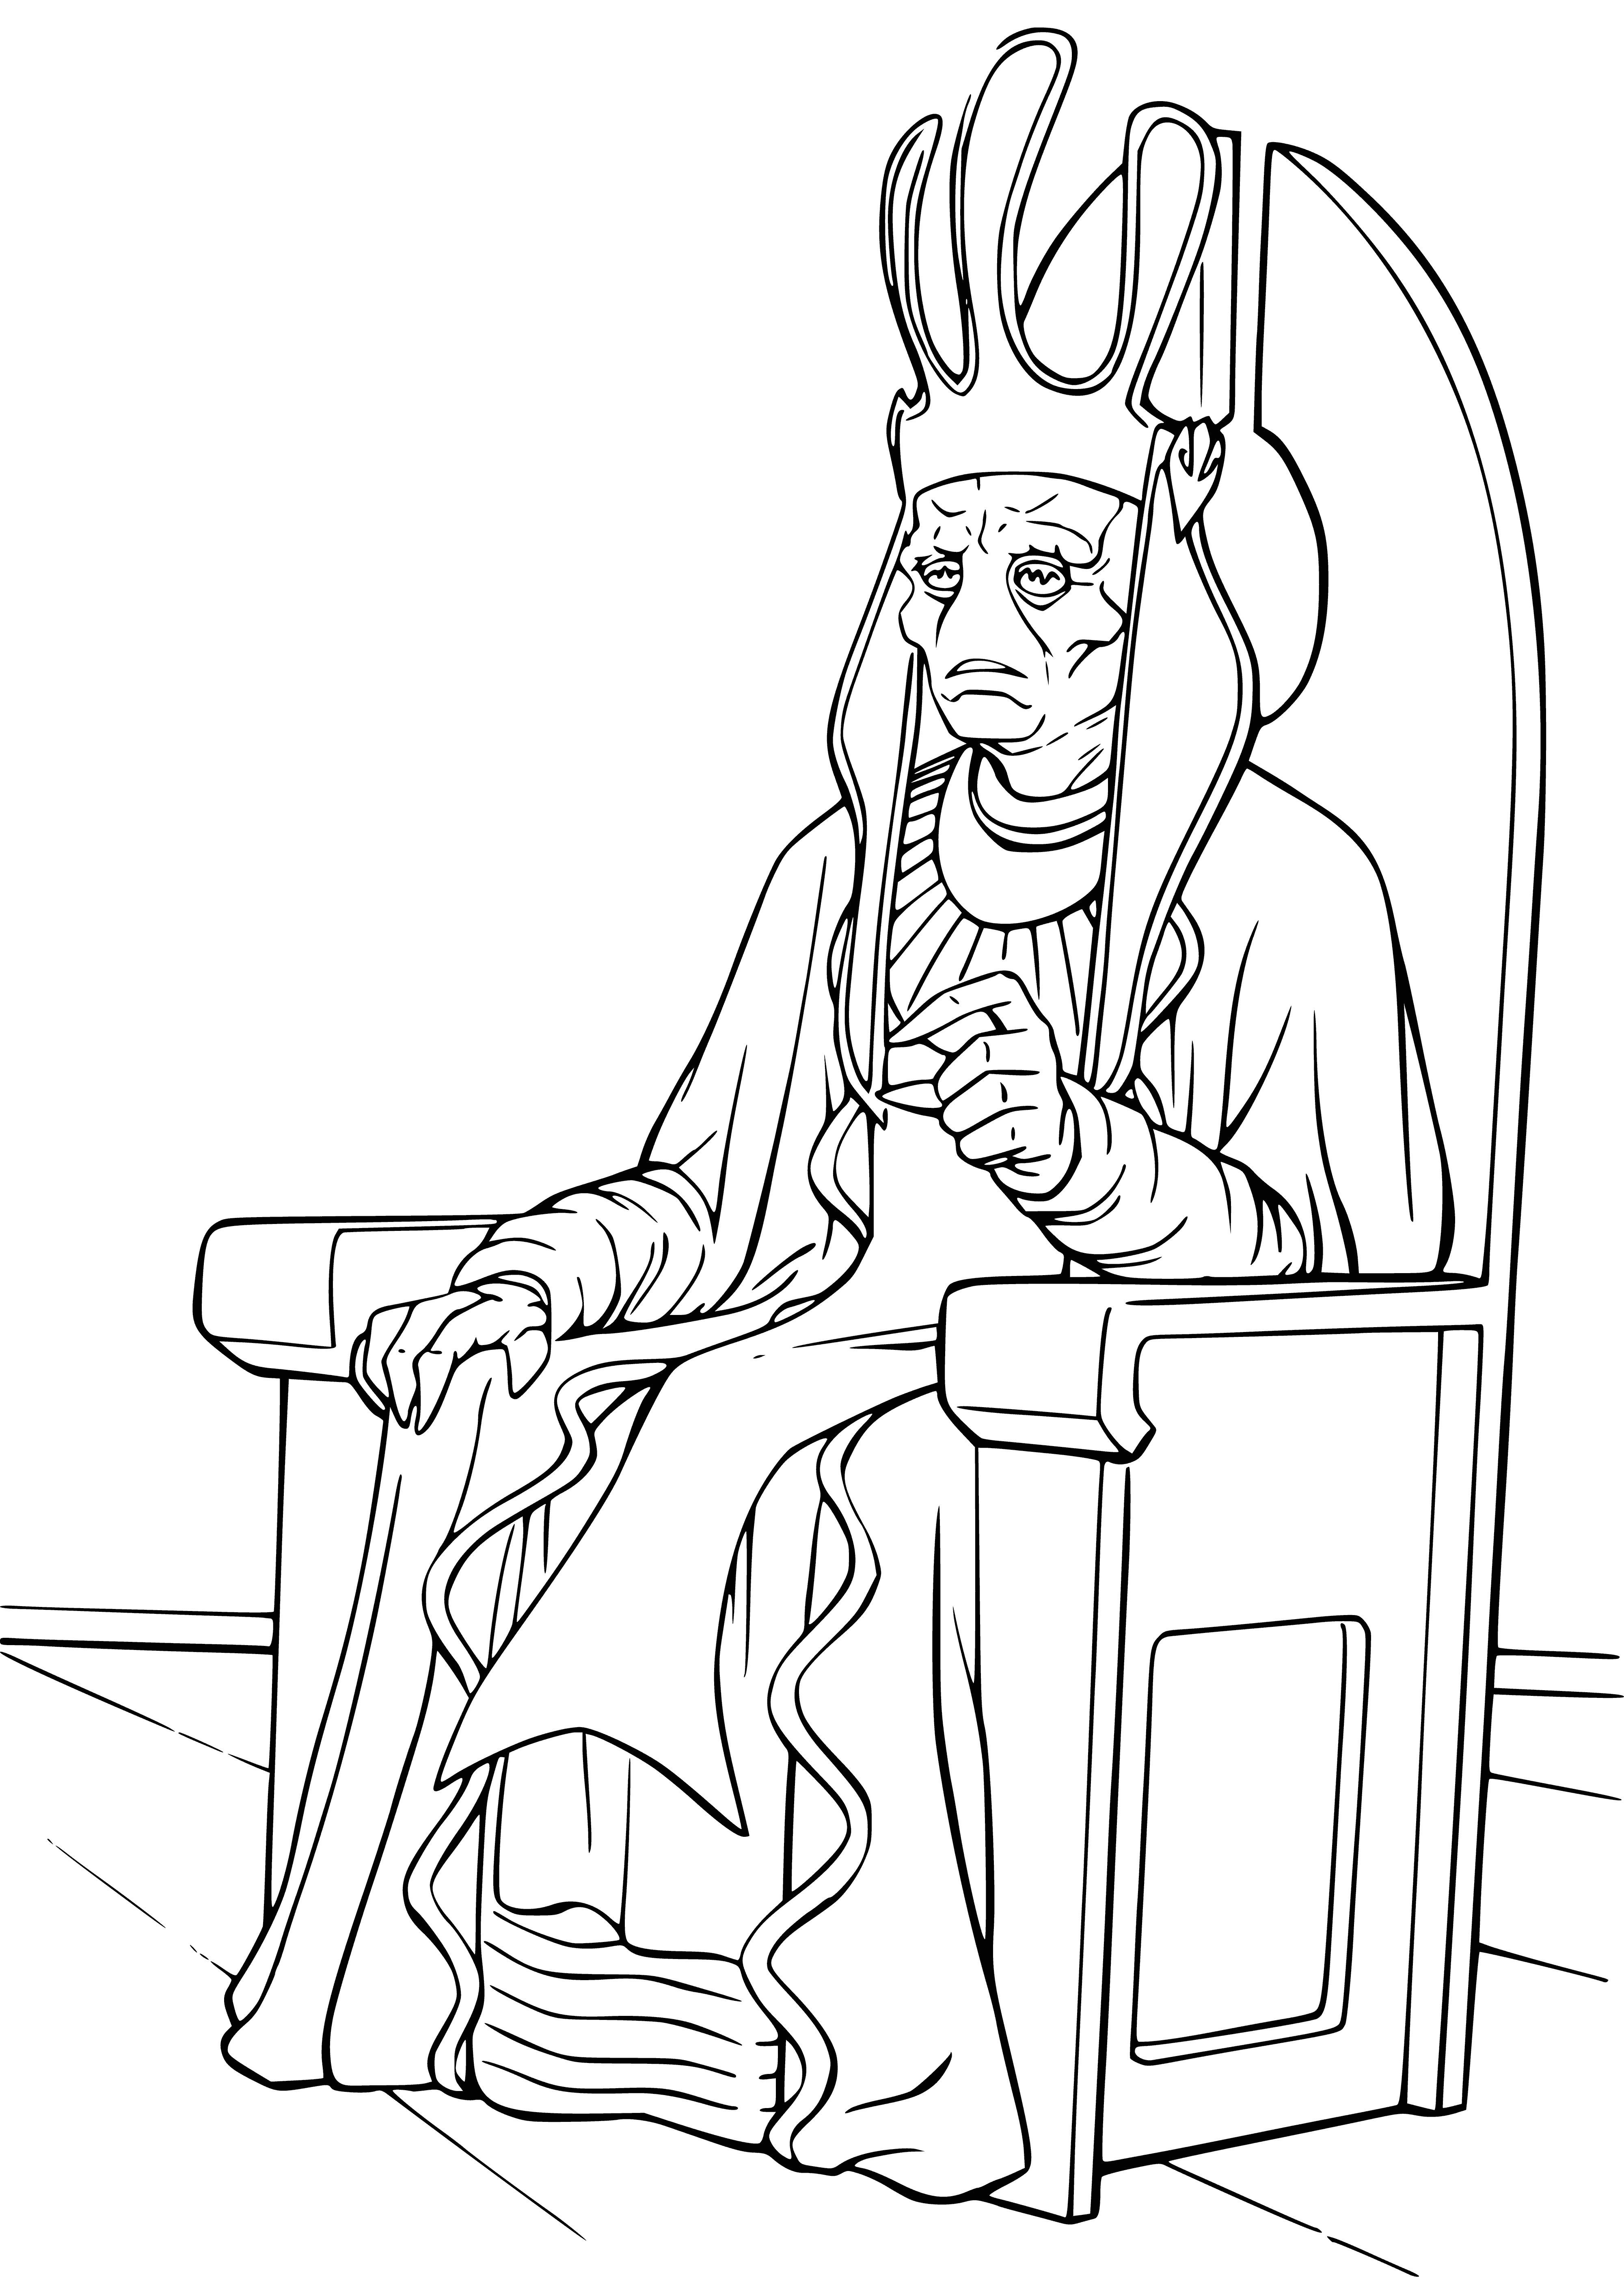 coloring page: Coloring page of Nute Gunray, Trade Federation leader and Governor wearing purple robe with disgusted look. #StarWars #ColoringPages